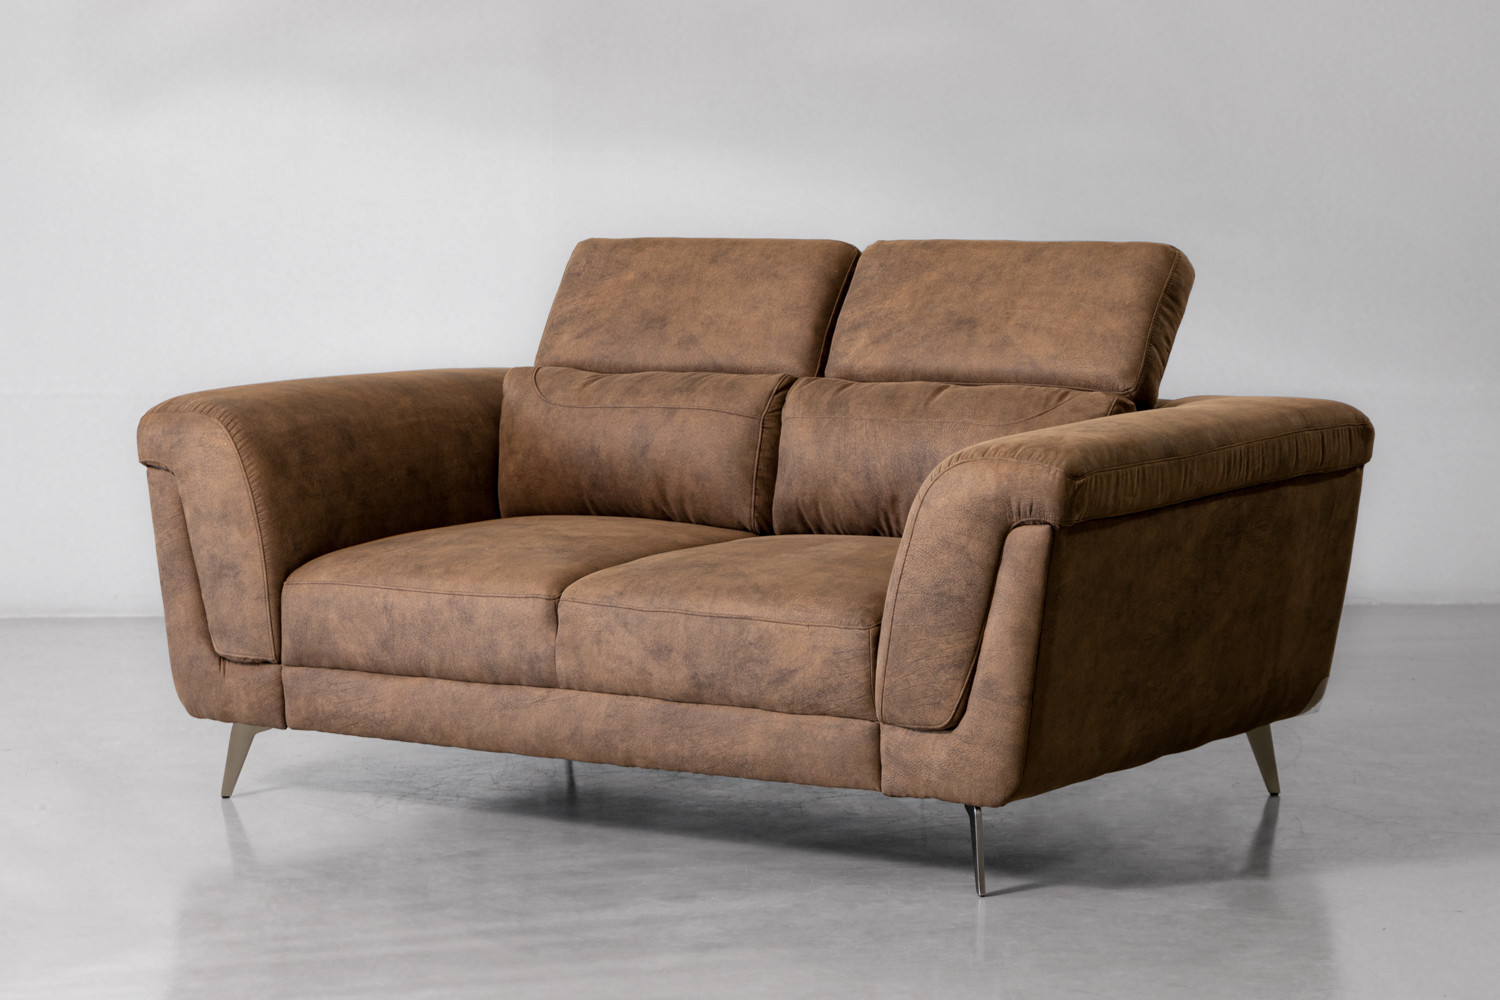 Laurence 2 Seater Couch - Mocha 2 Seater Fabric Couches - 3